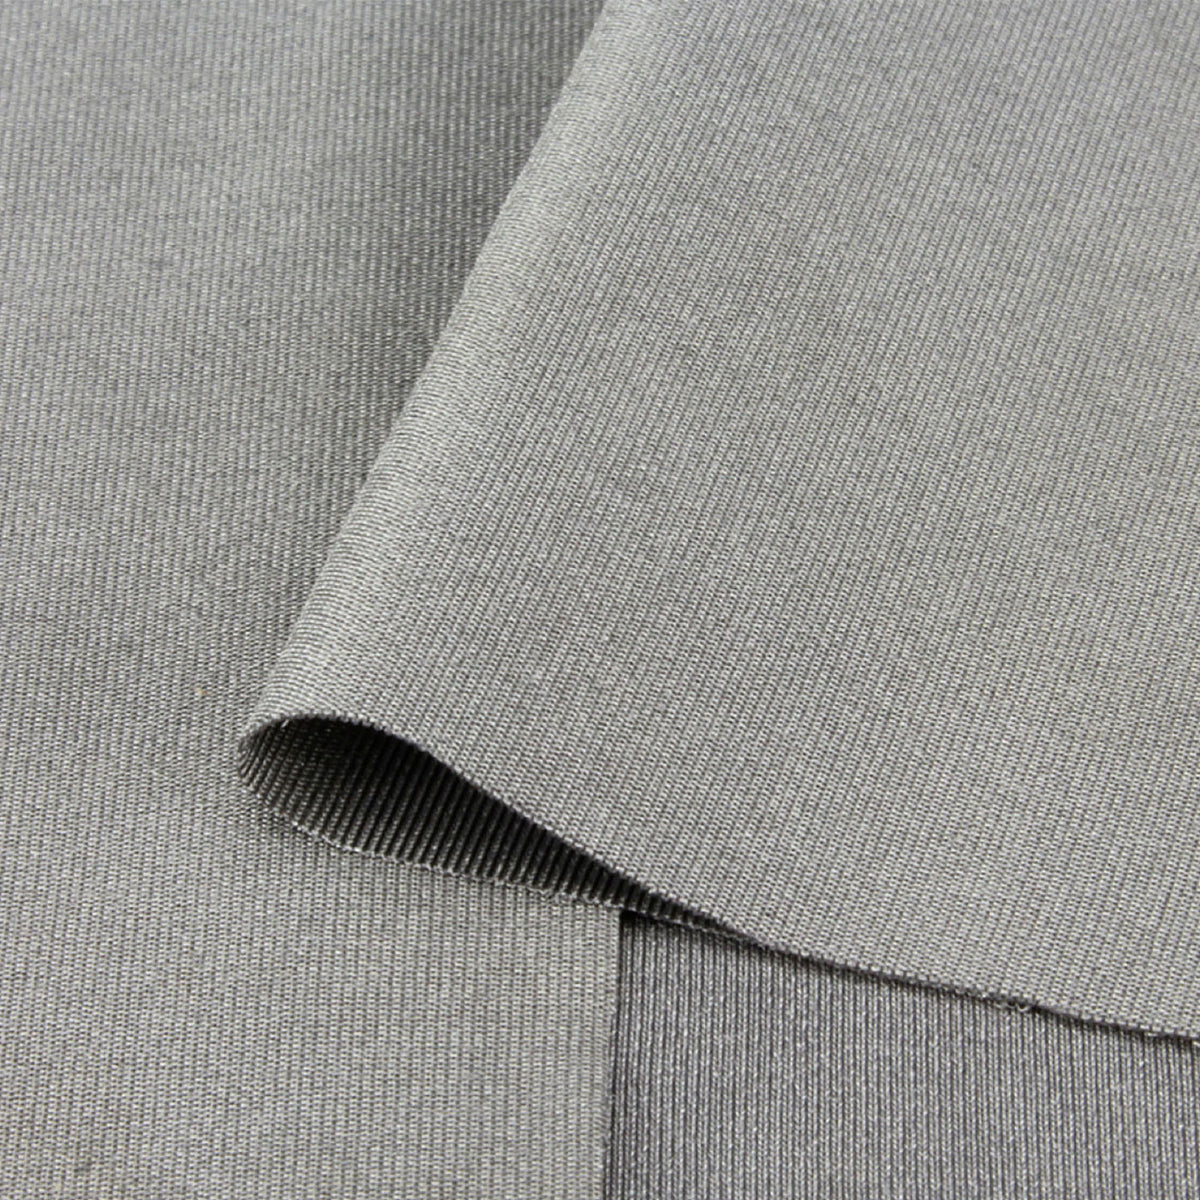 SILVER-ELASTIC Shielding Fabric for High Frequency EMF (per metre)